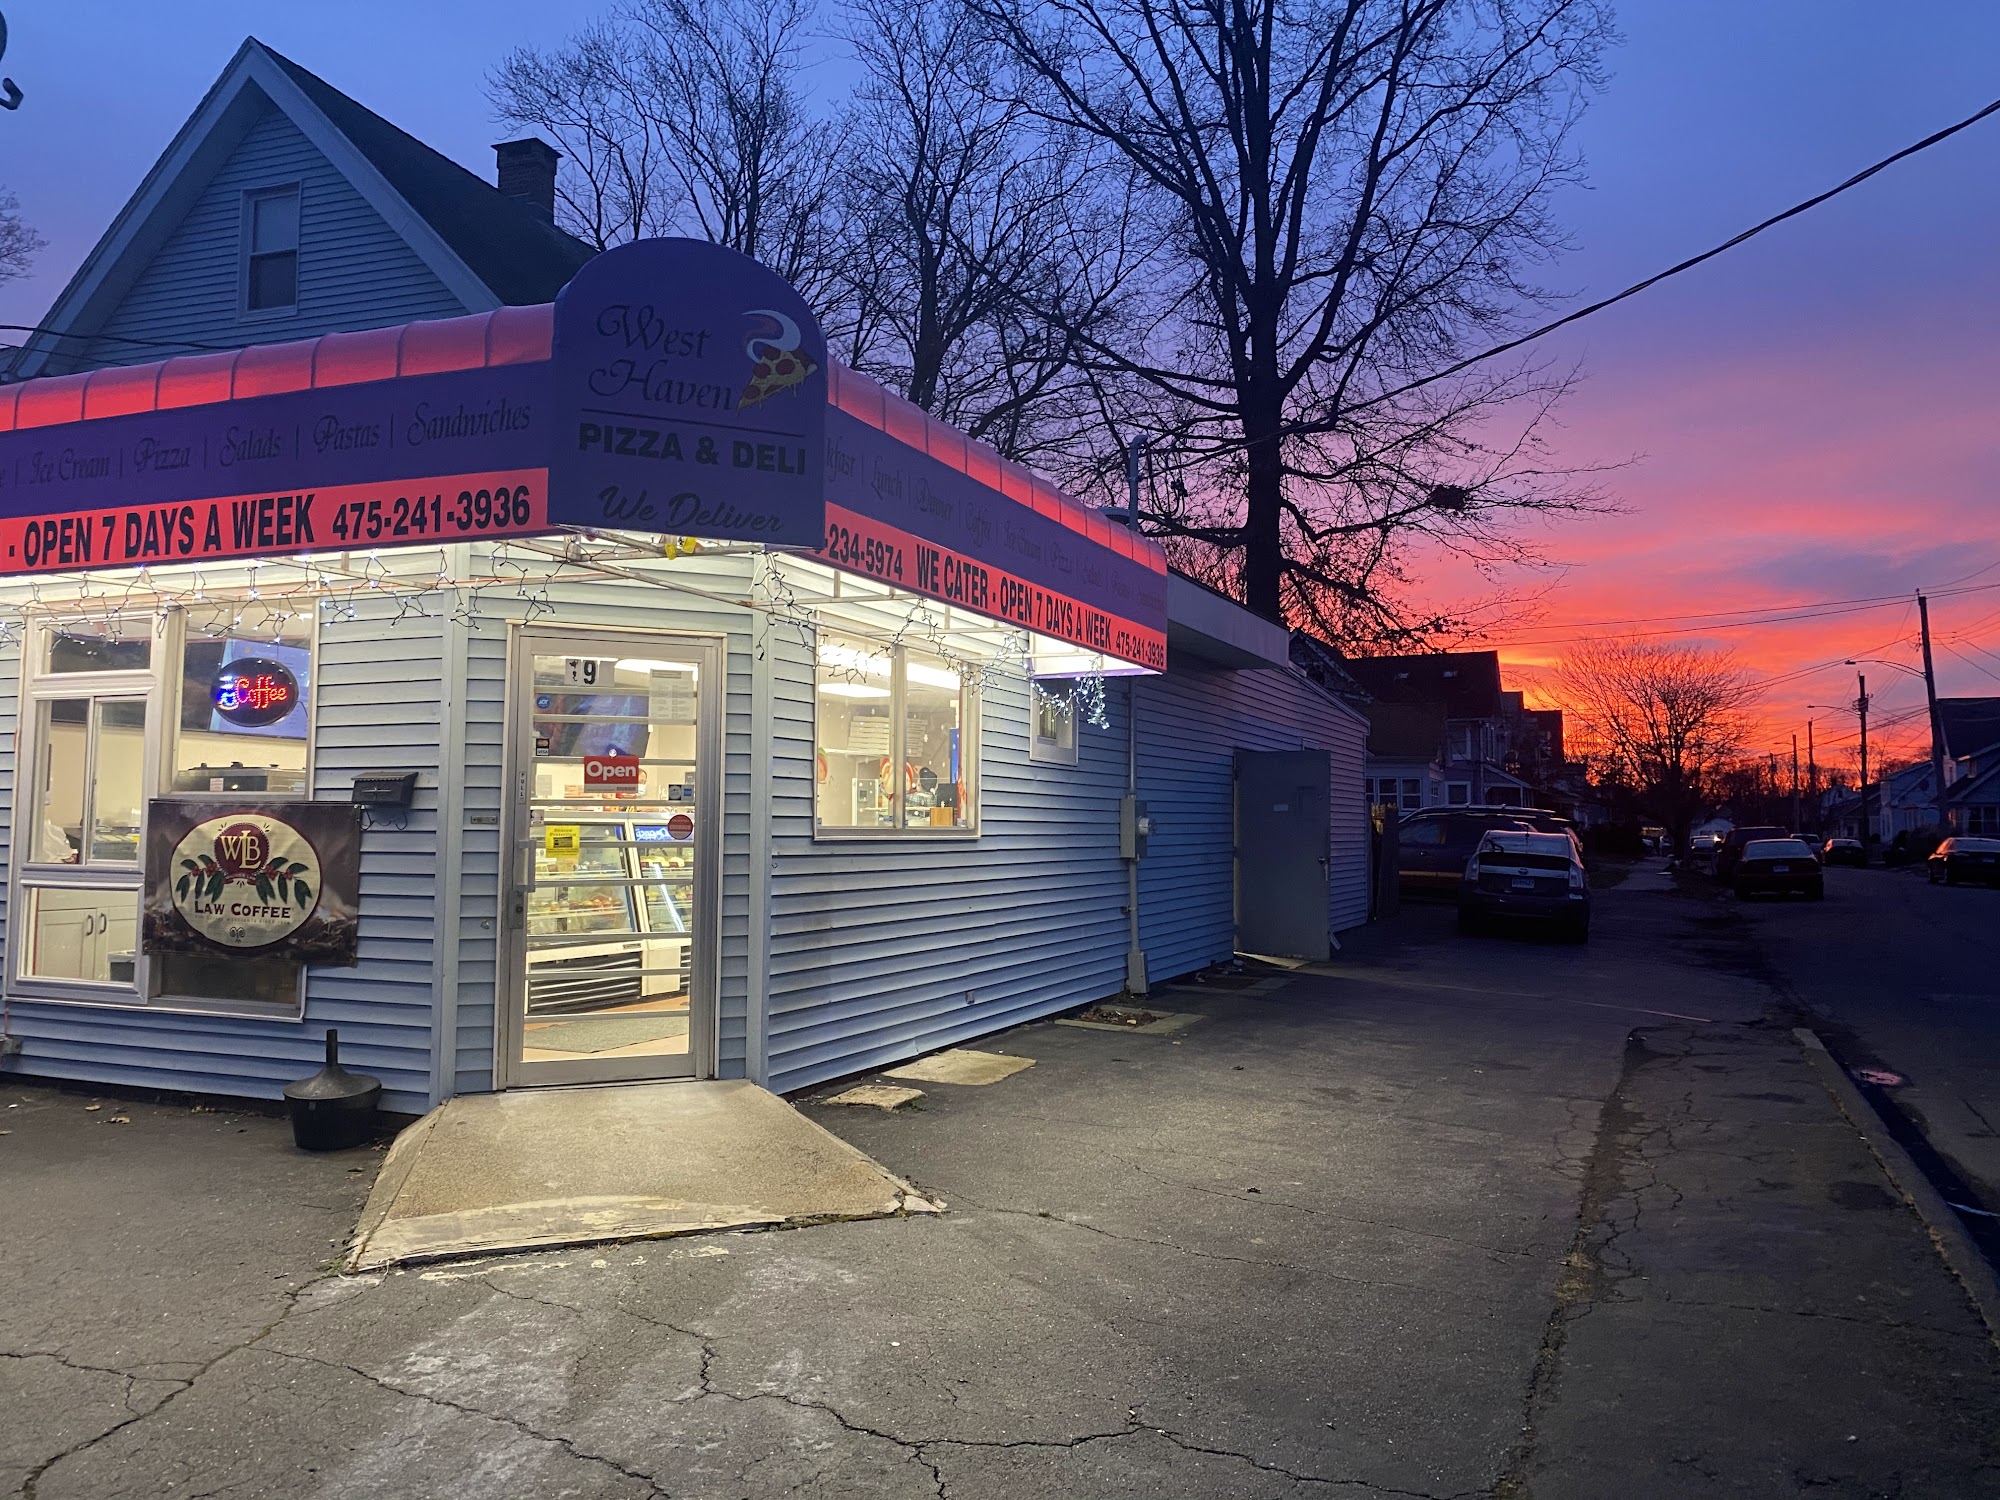 West Haven Pizza and Deli